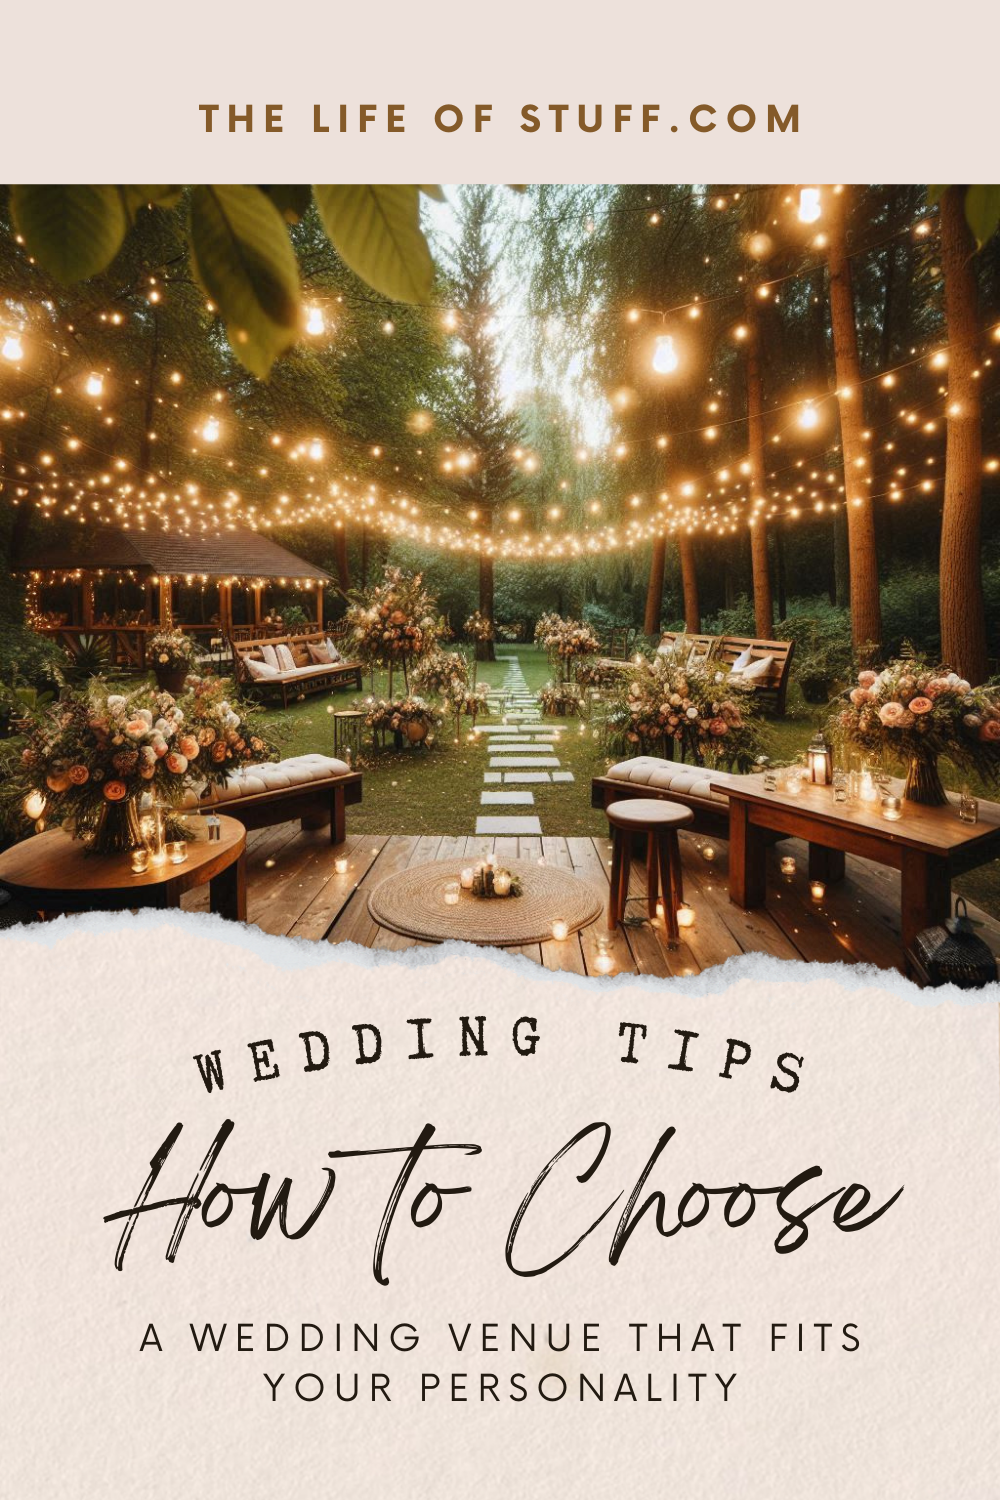 How To Choose A Wedding Venue That Fits Your Personality - The Life of Stuff